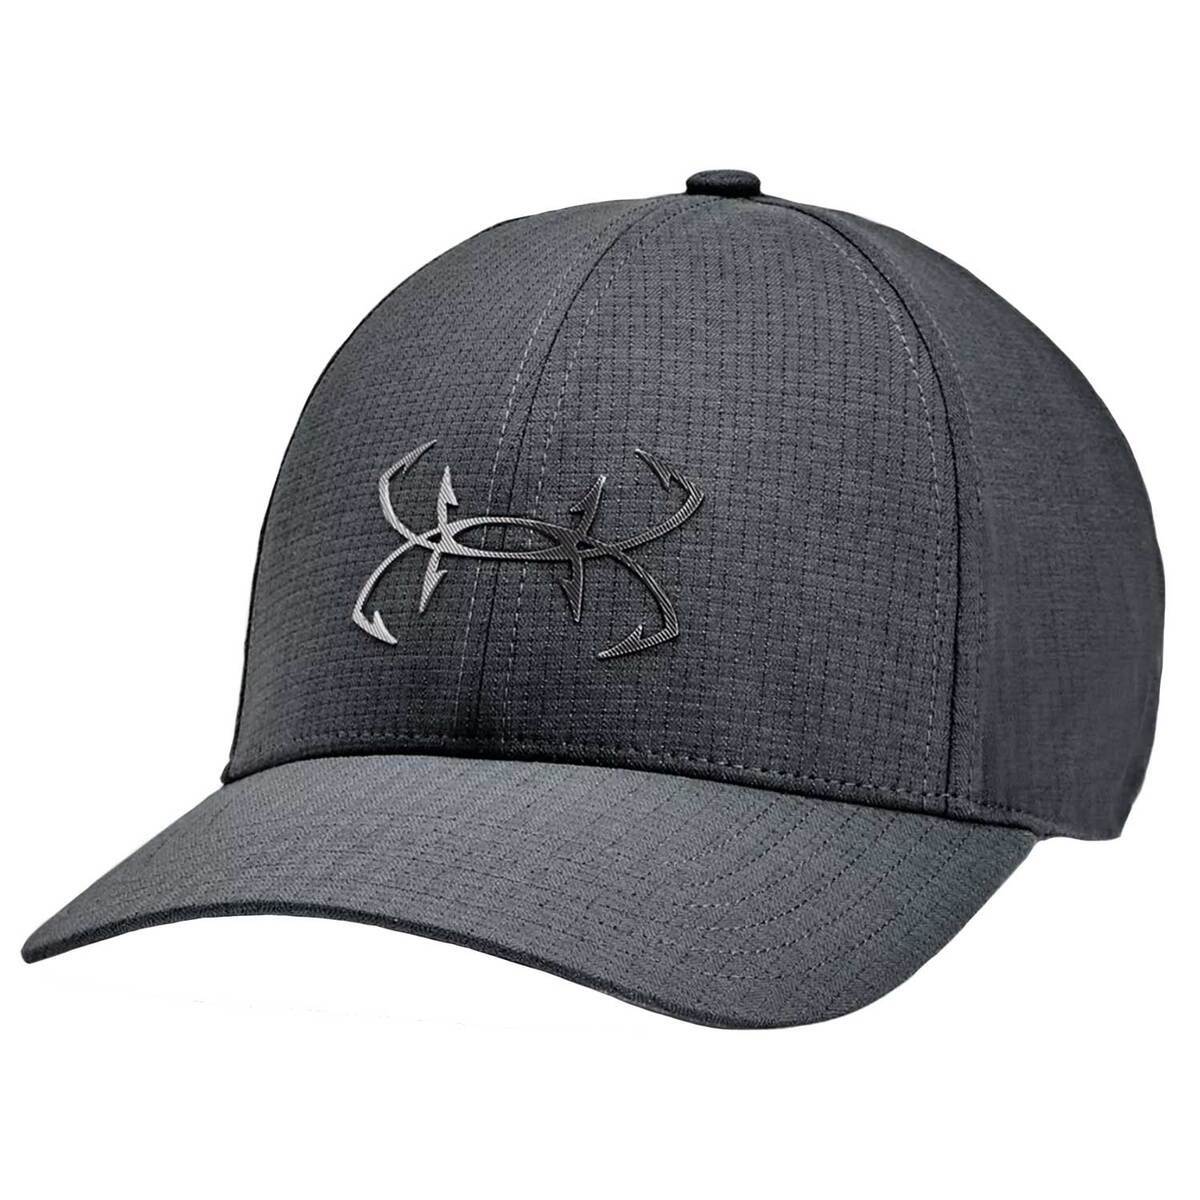 Under Armour Women's Fly By ArmourVent Cap